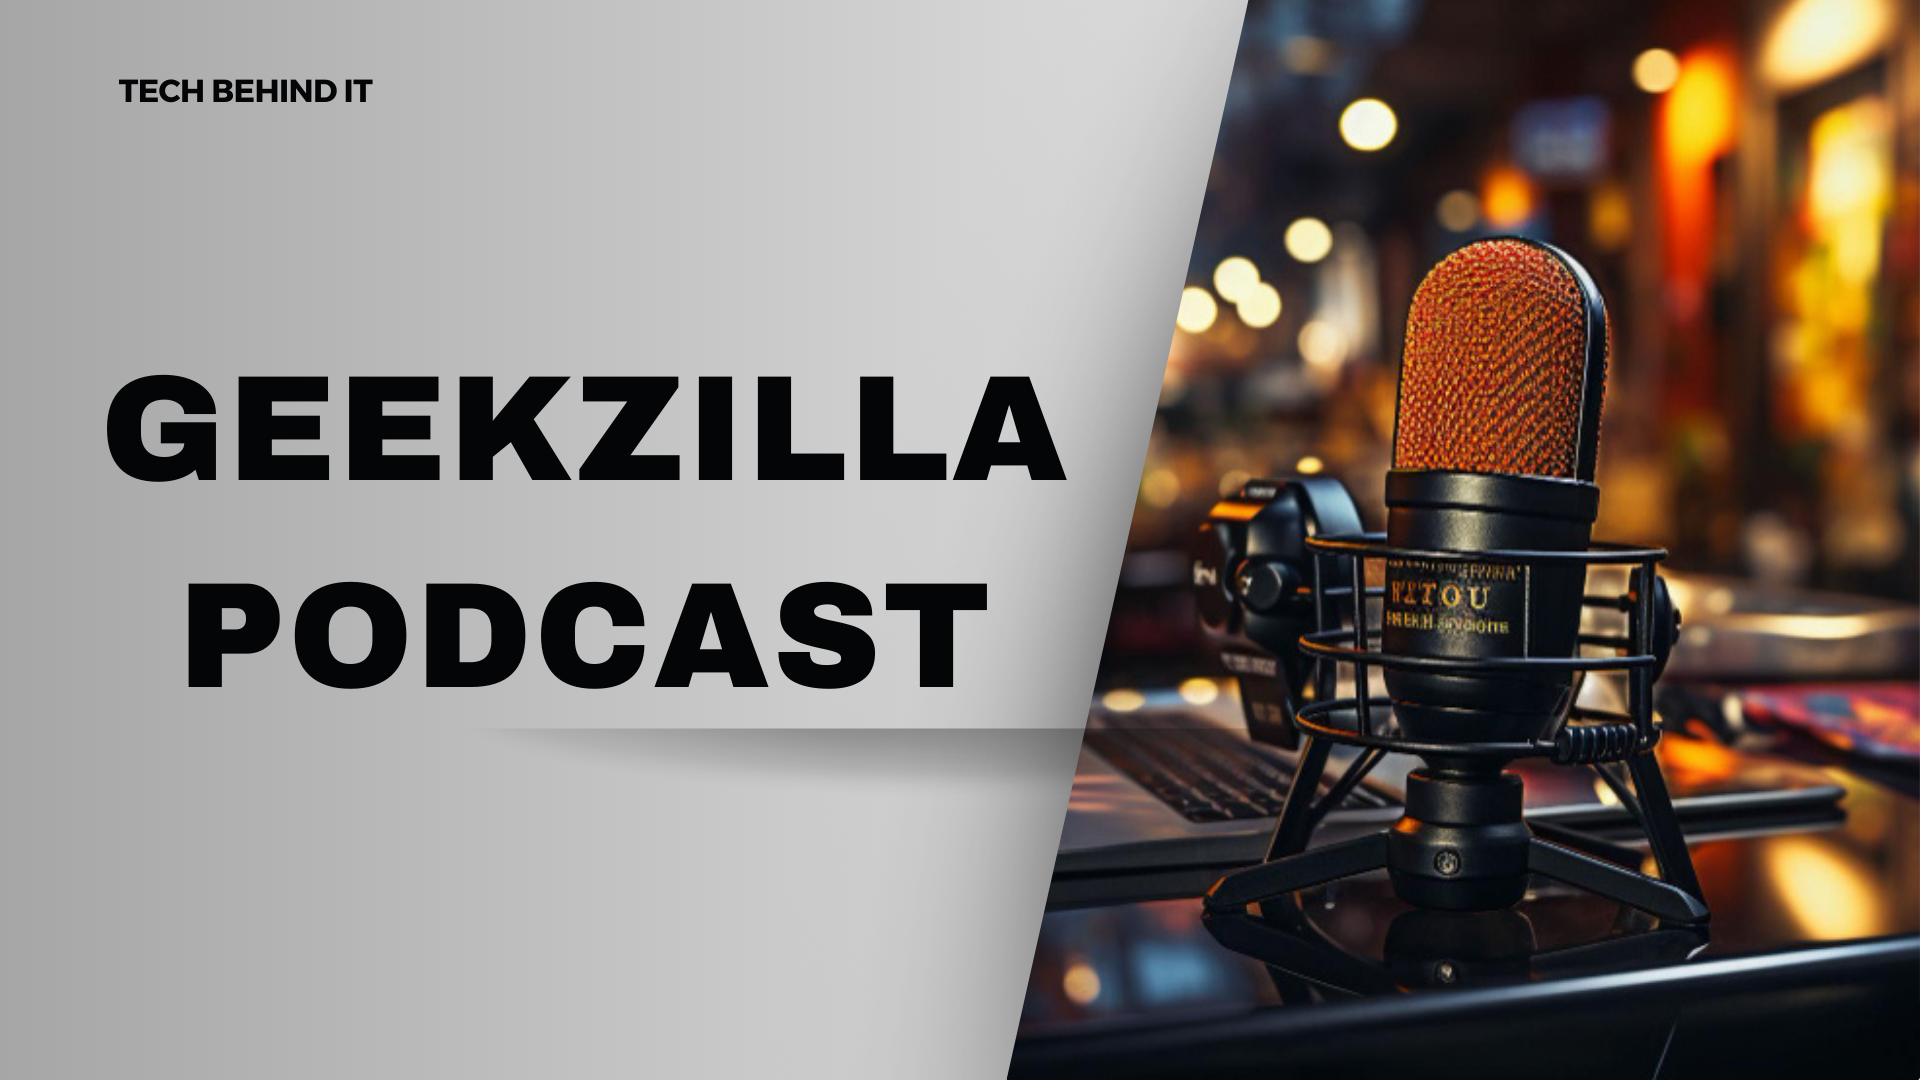 Geekzilla Podcast: Dive into the World of Geek Culture